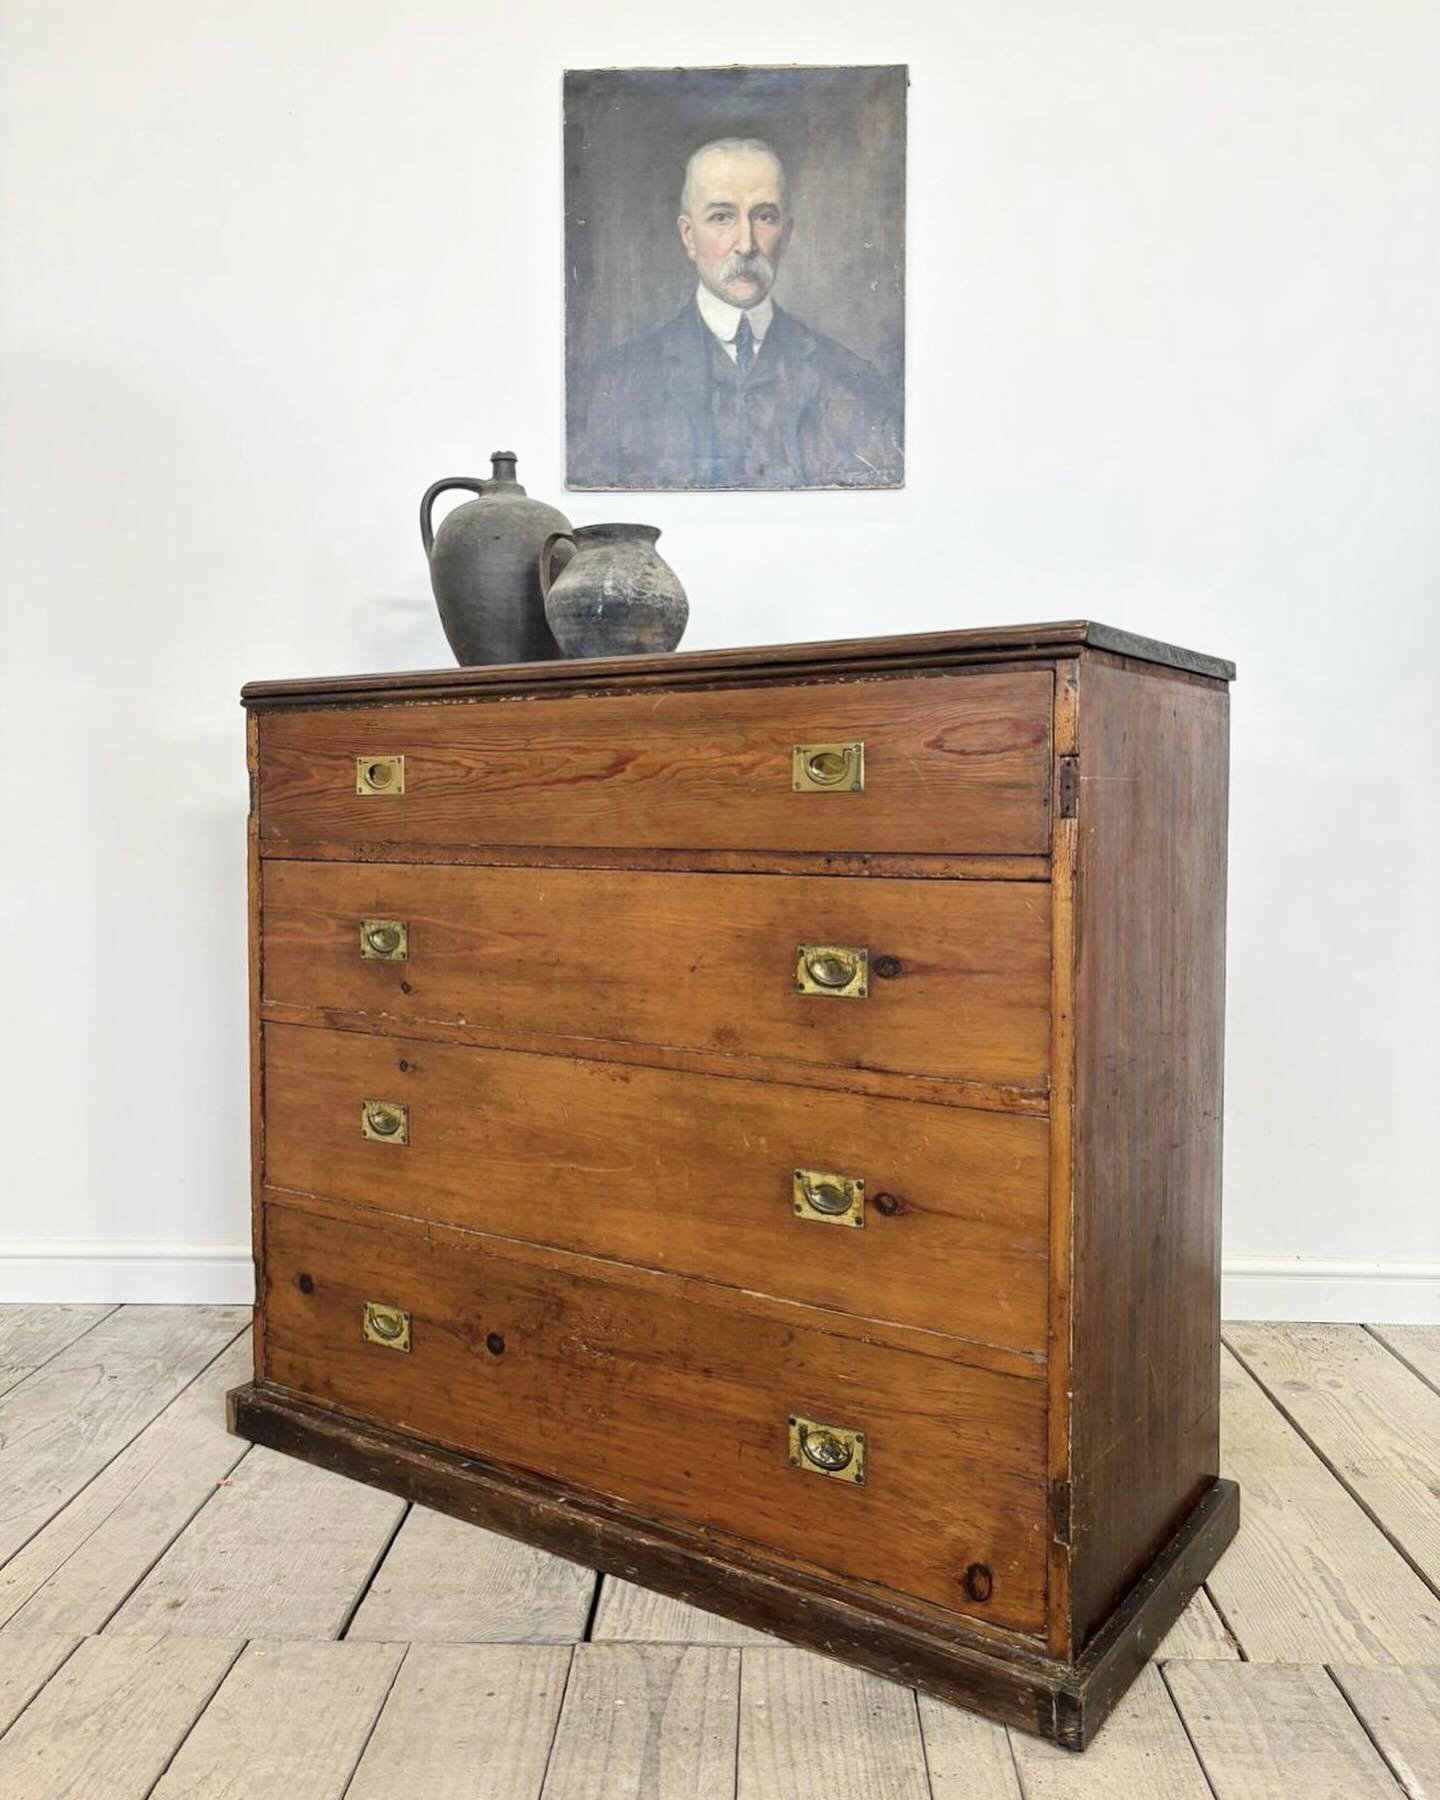 Antique military campaign chest of drawers with flush brass handles new in stock&hellip; 
.
.
.
.
#vintage #antique #19thcentury #campaignchest #chestofdrawers #furniture #vintagefurniture #antiquefurniture #frenchfurniture #frenchantiques #englishan